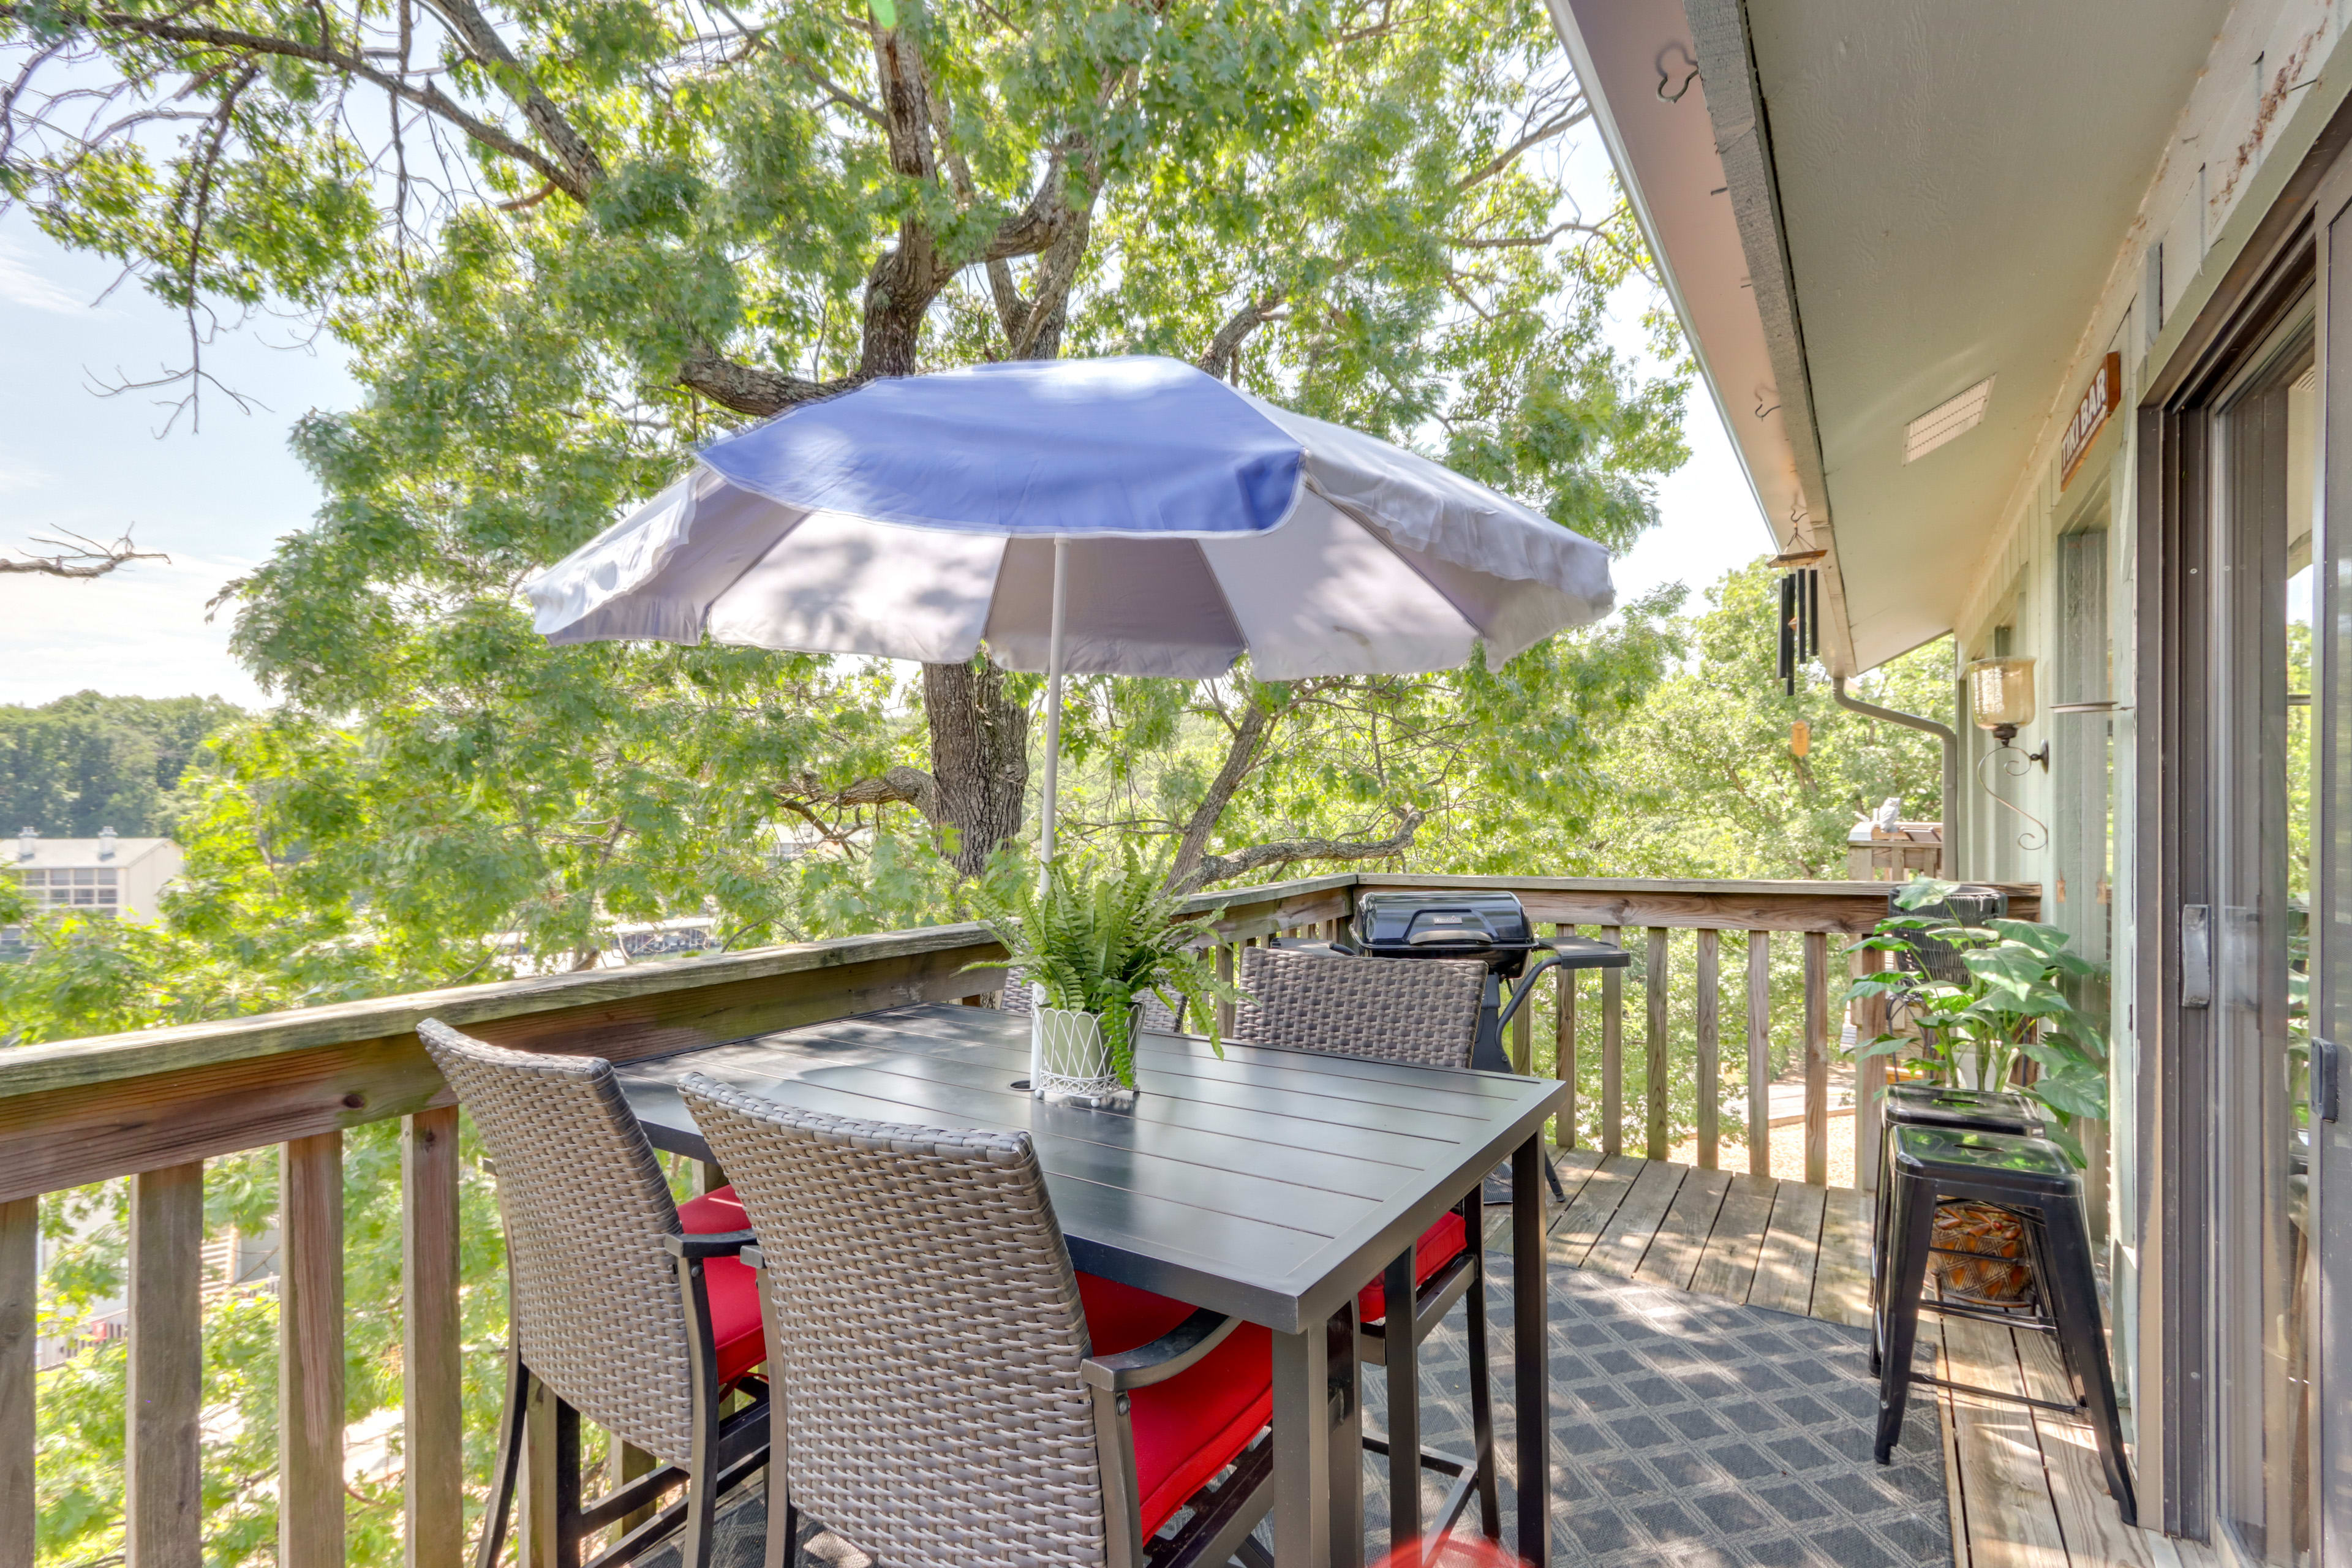 Private Patio | Outdoor Dining Area | Gas Grill